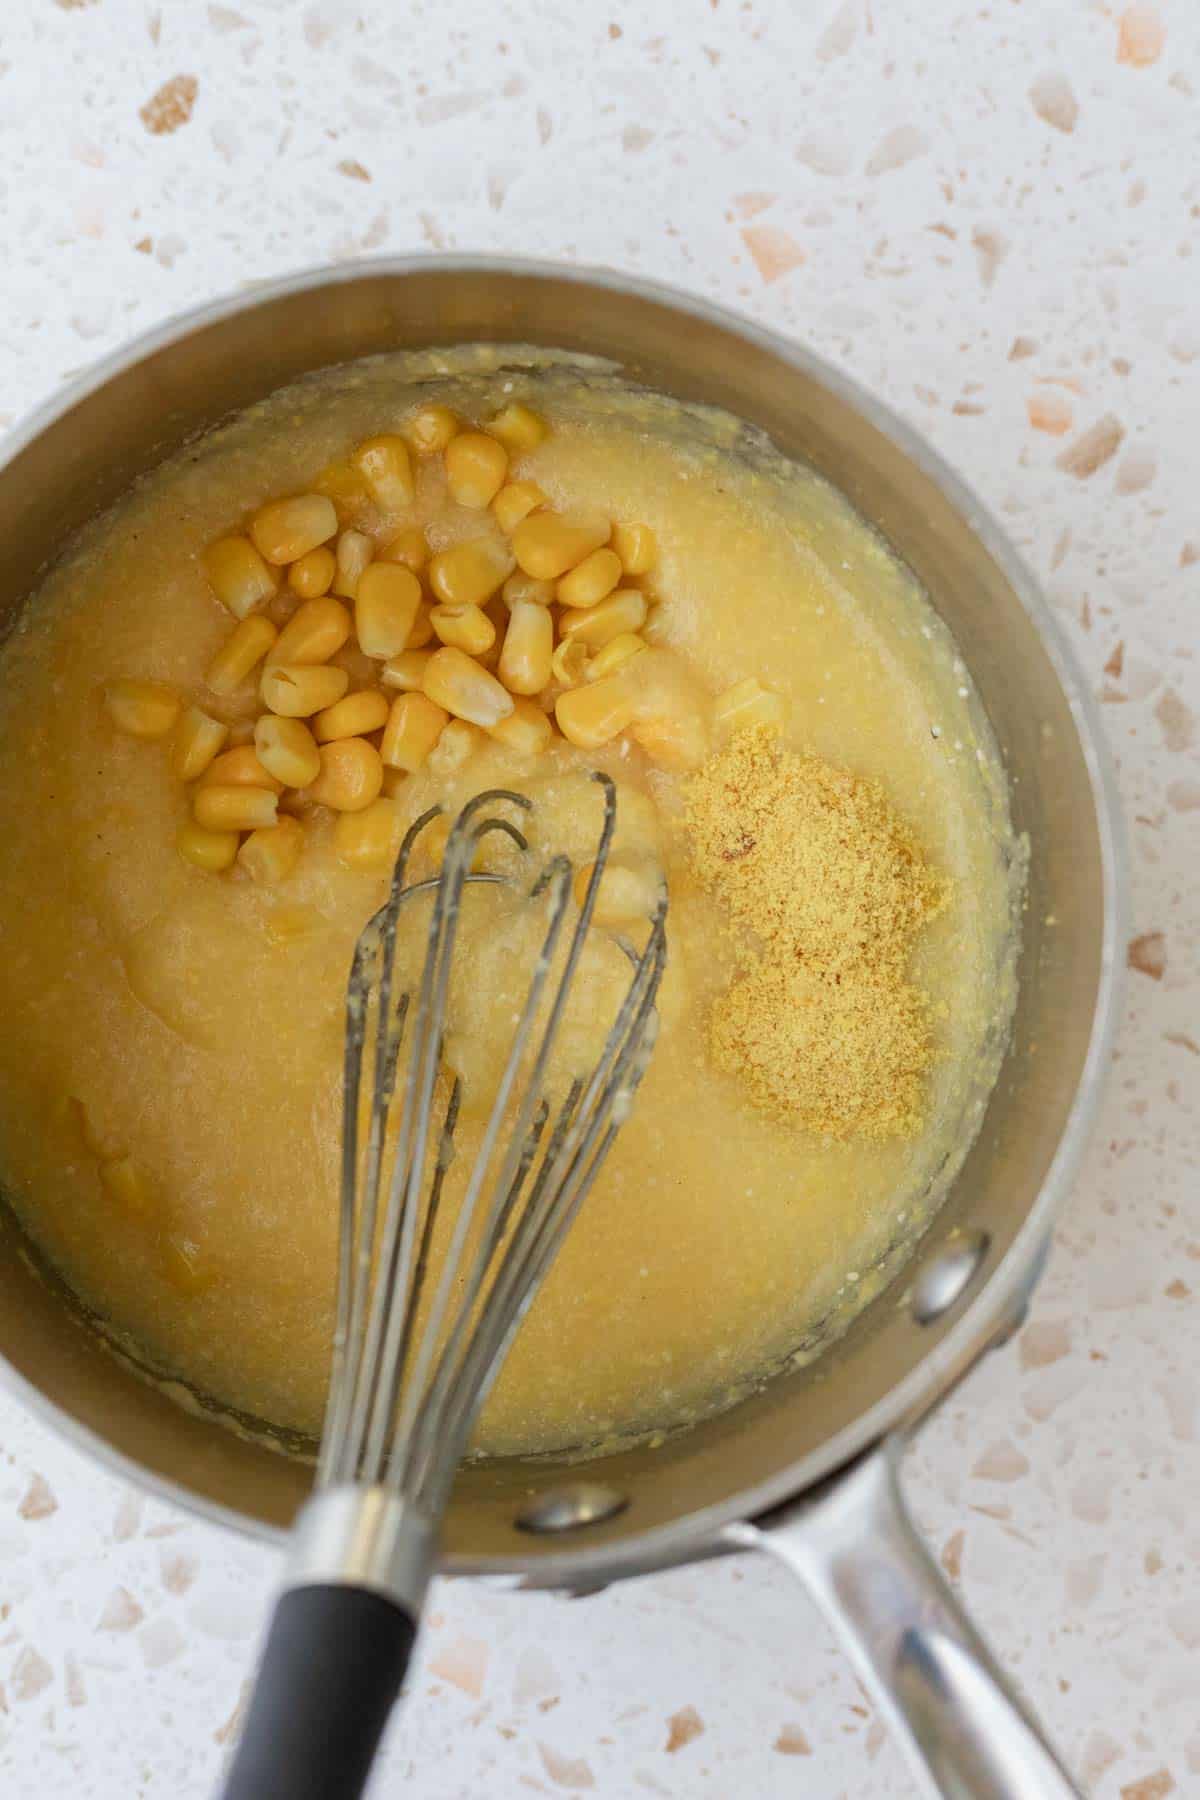 Whisking ingredients into the polenta in a saucepan.